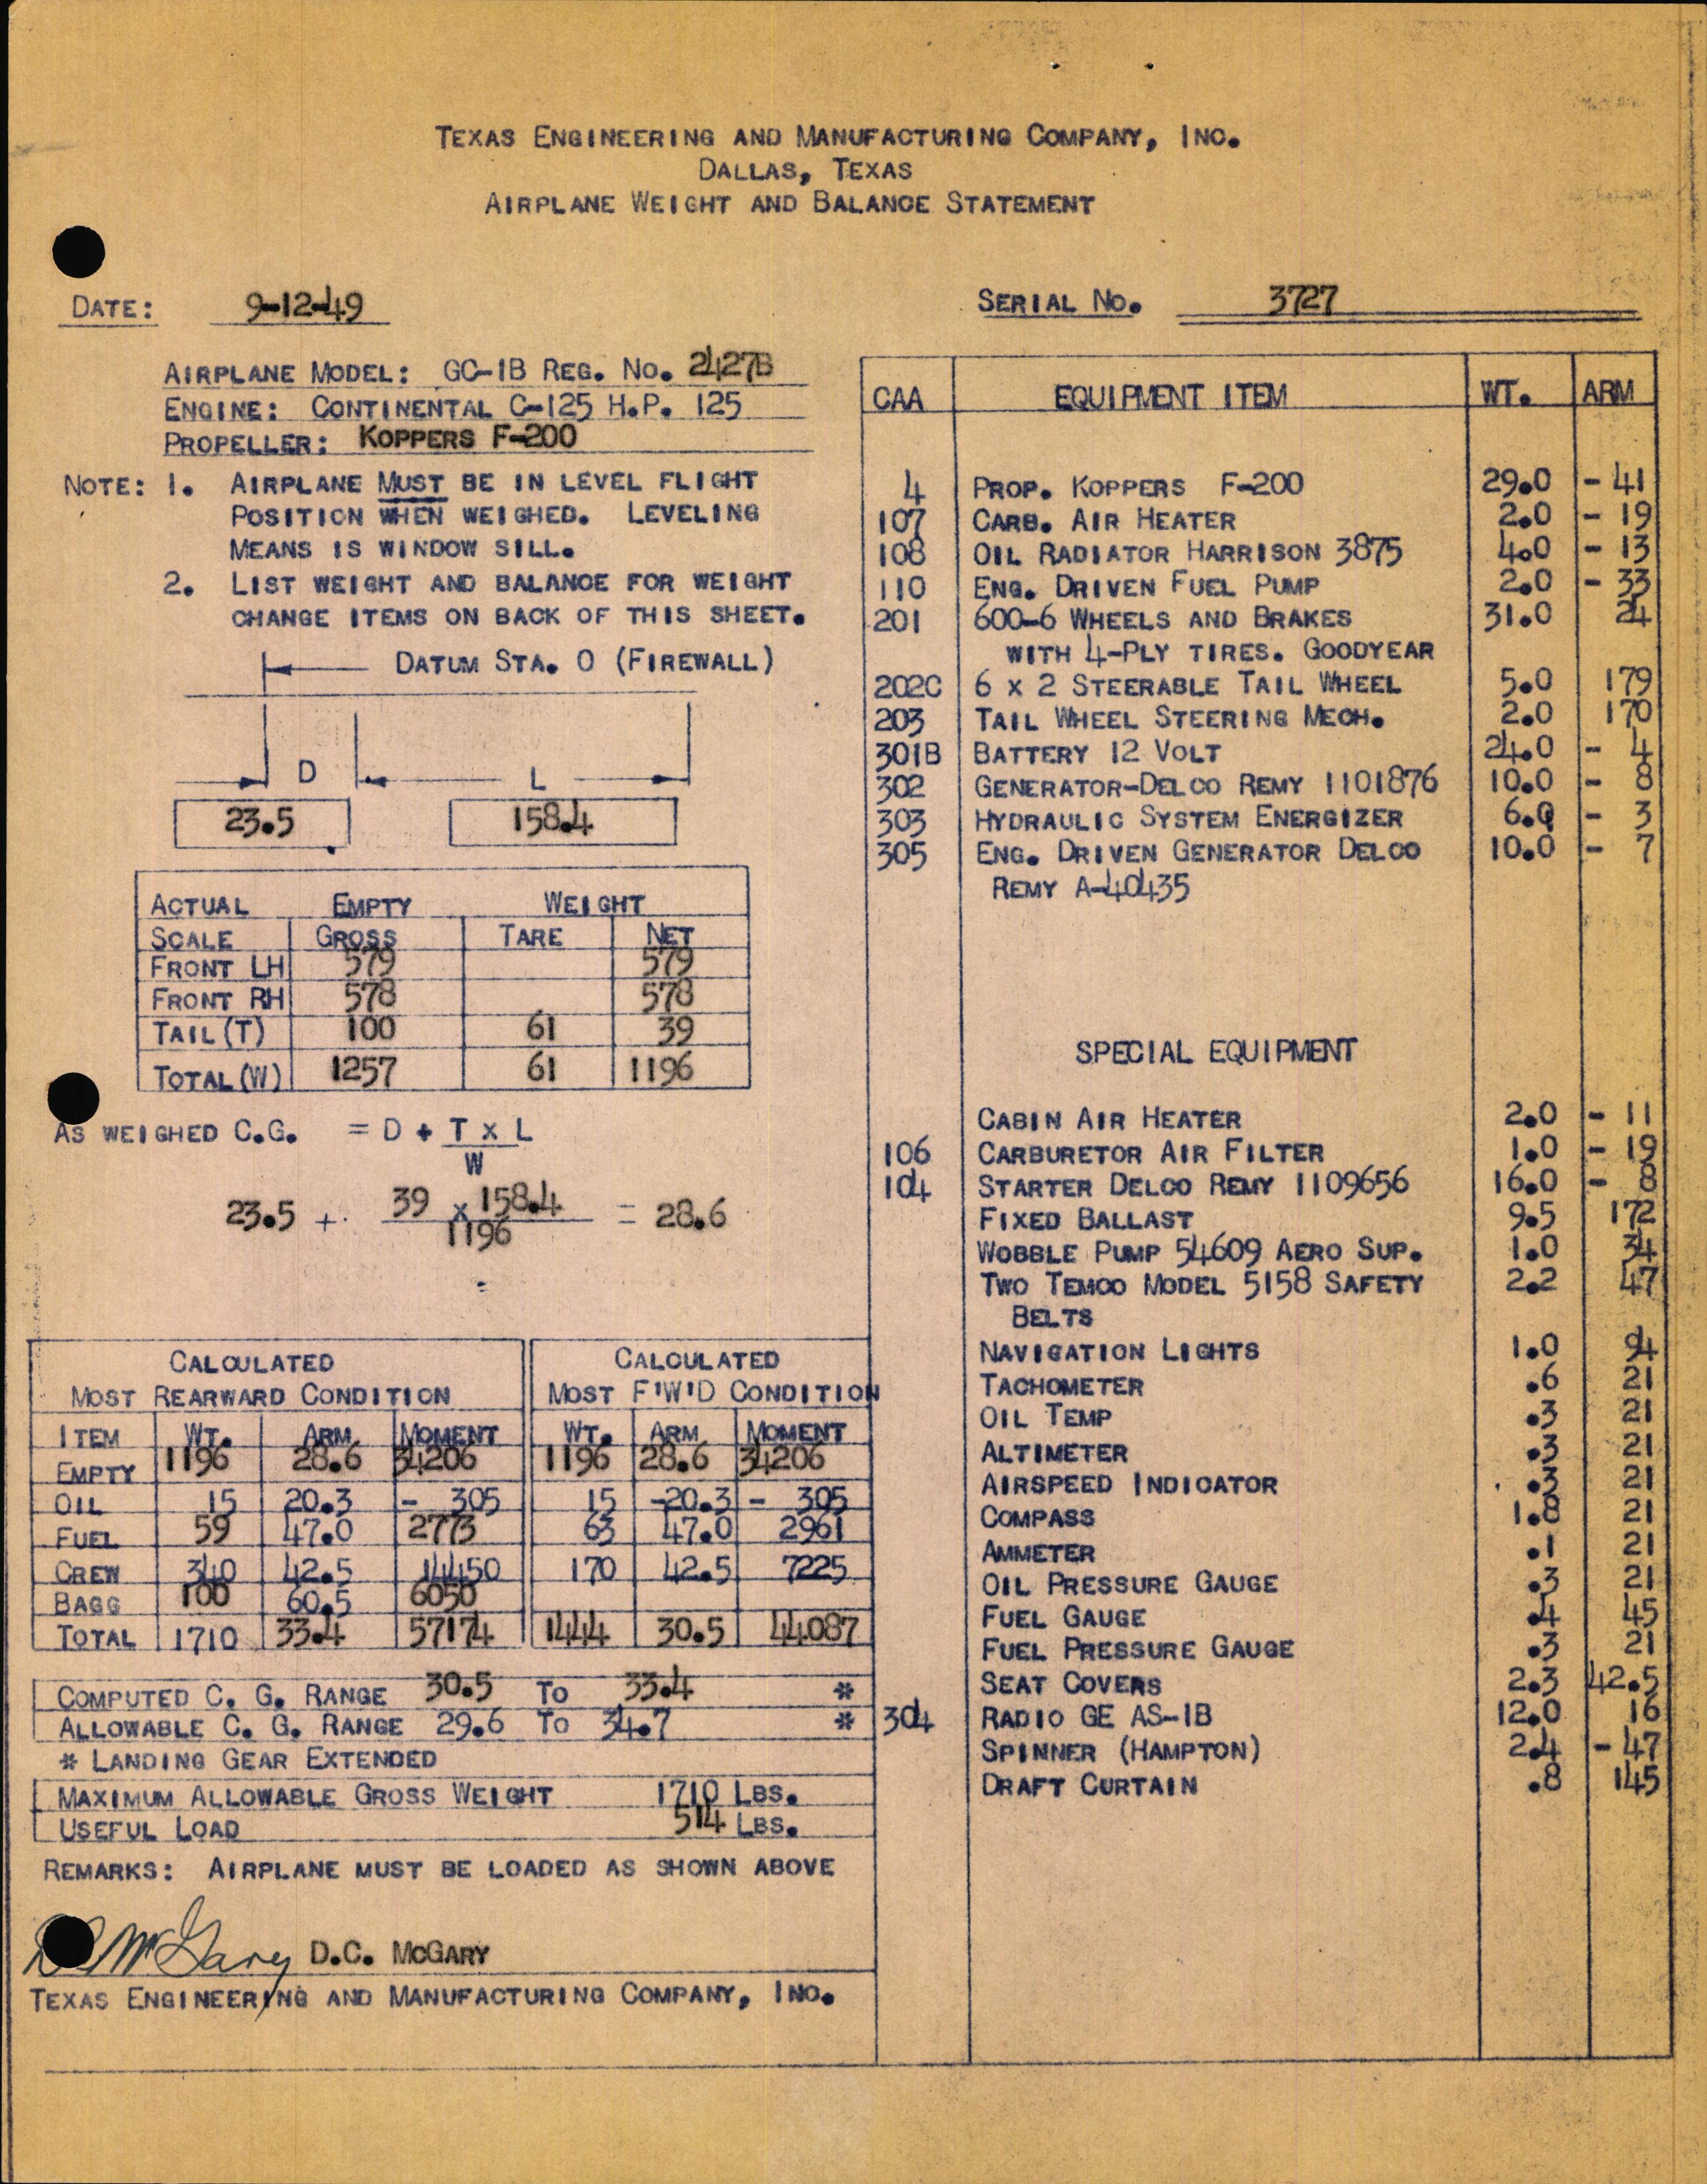 Sample page 3 from AirCorps Library document: Technical Information for Serial Number 3727